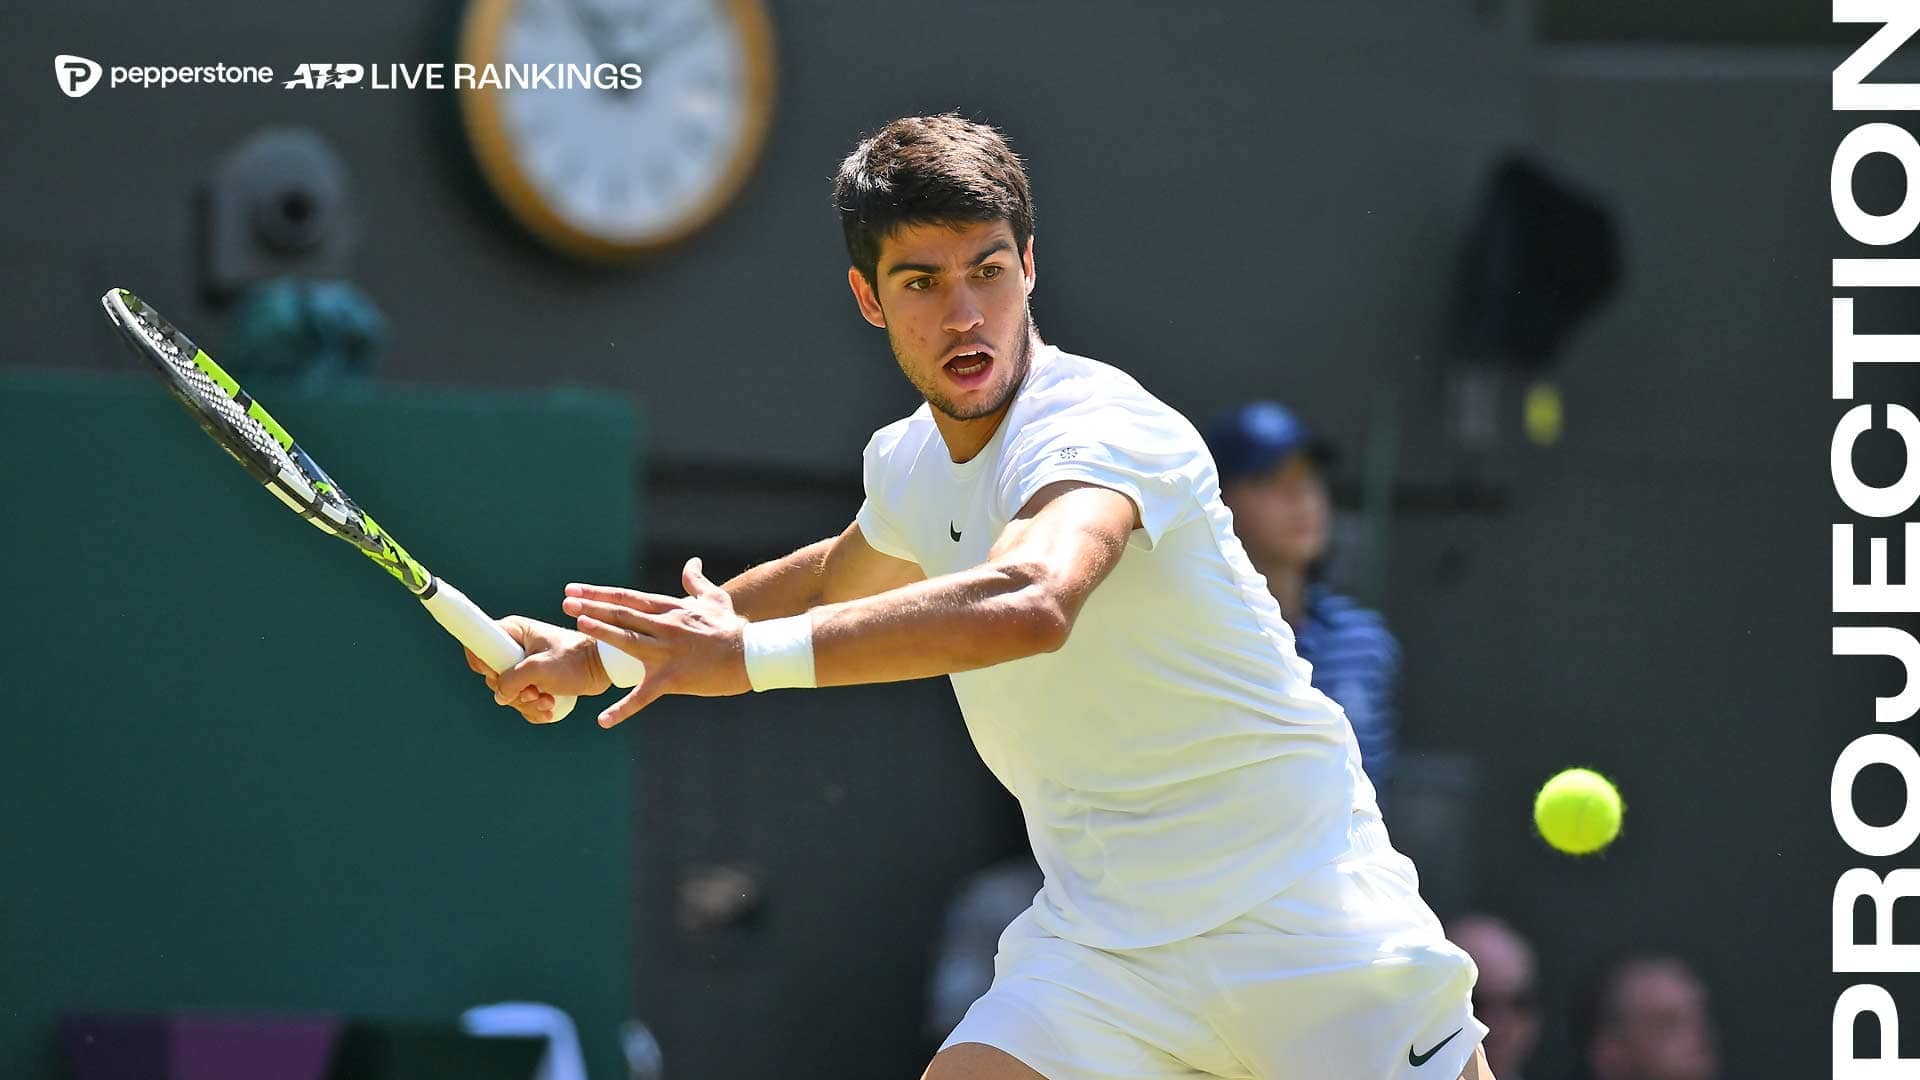 Carlos Alcaraz is No. 1 in the Pepperstone ATP Live Rankings heading into his Wimbledon final meeting with Novak Djokovic.